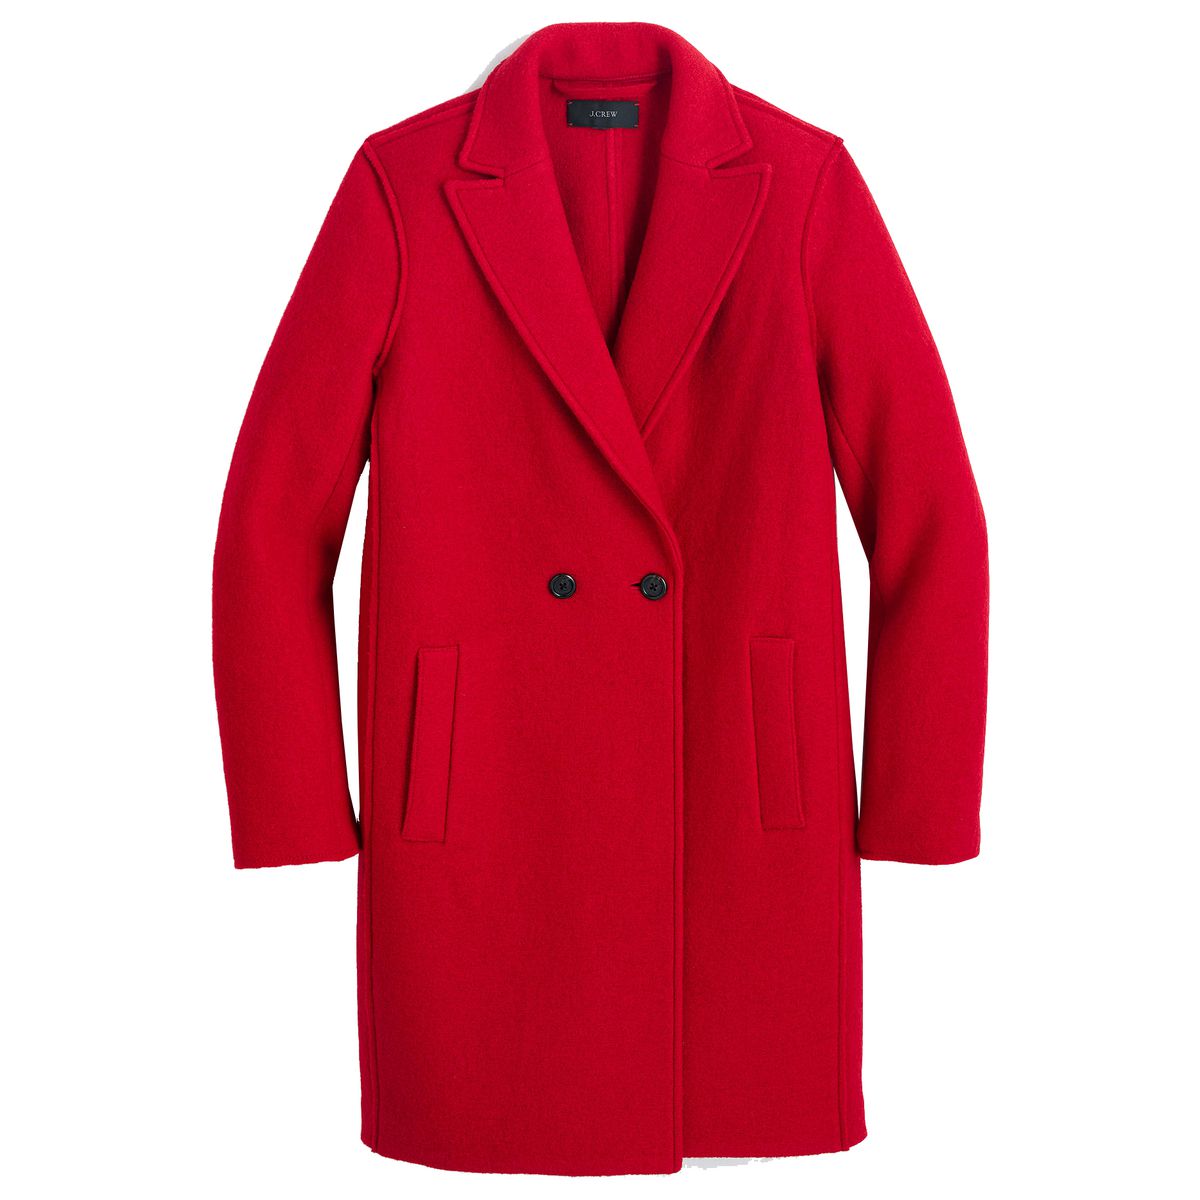 THE DAPHNE COAT IN BOILED WOOL